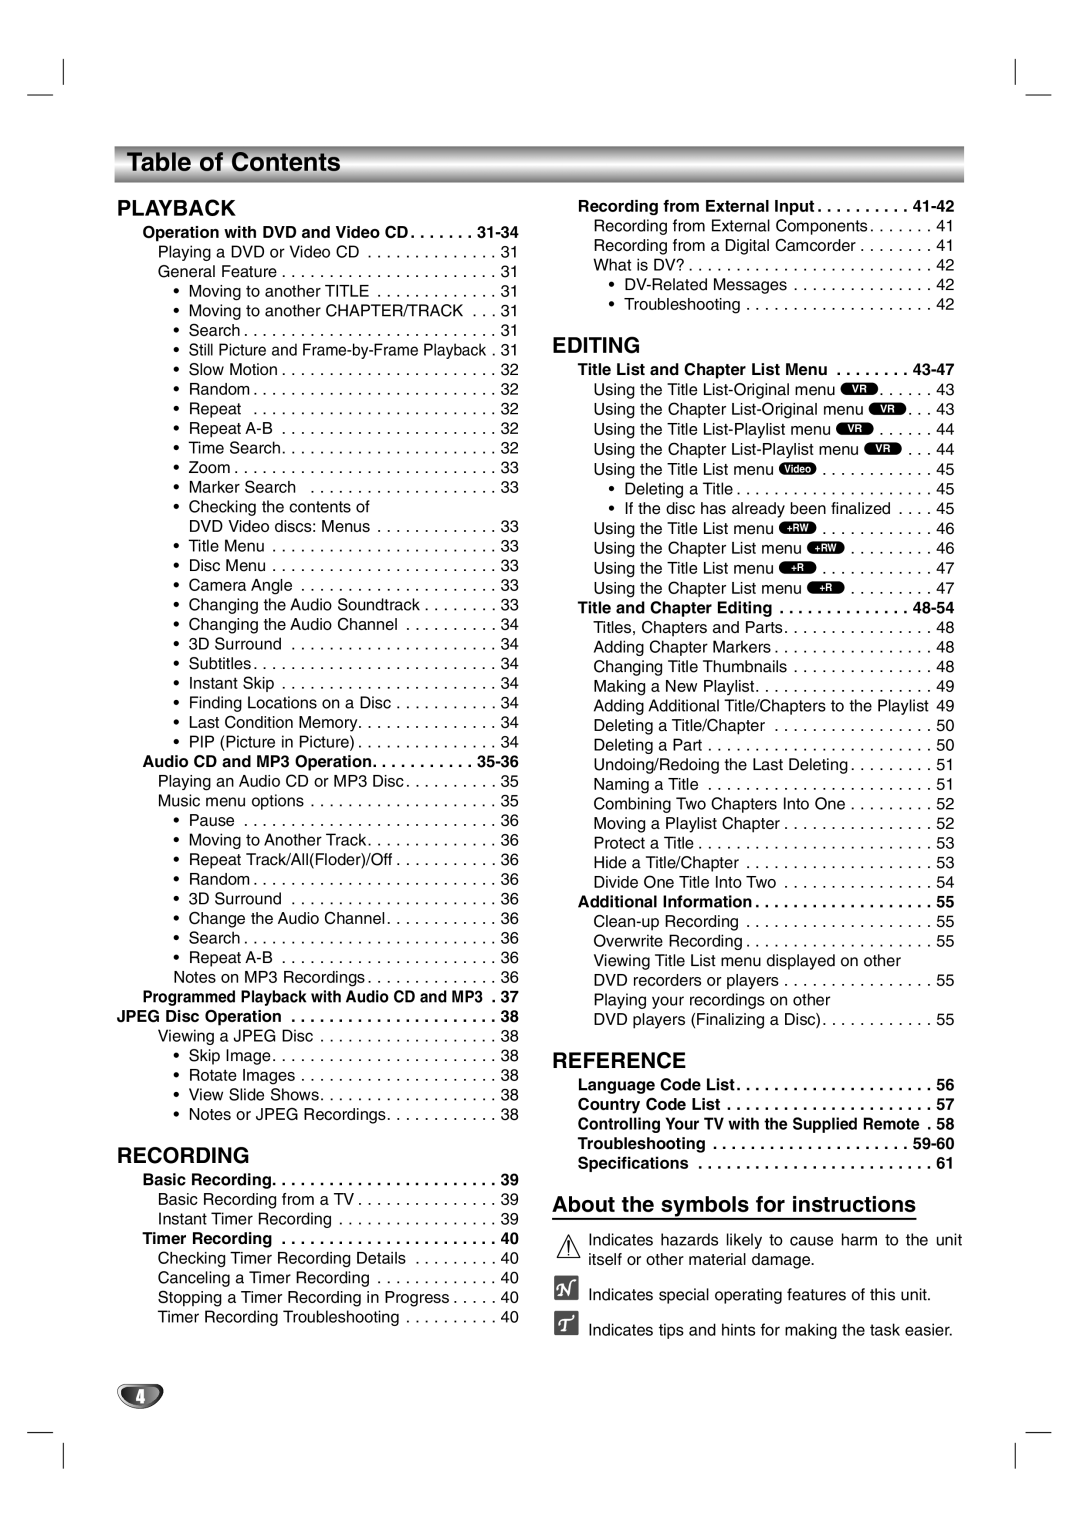 NEC NDR50 Editing, Reference, About the symbols for instructions, Table of Contents, Playback, Basic Recording, 48-54 